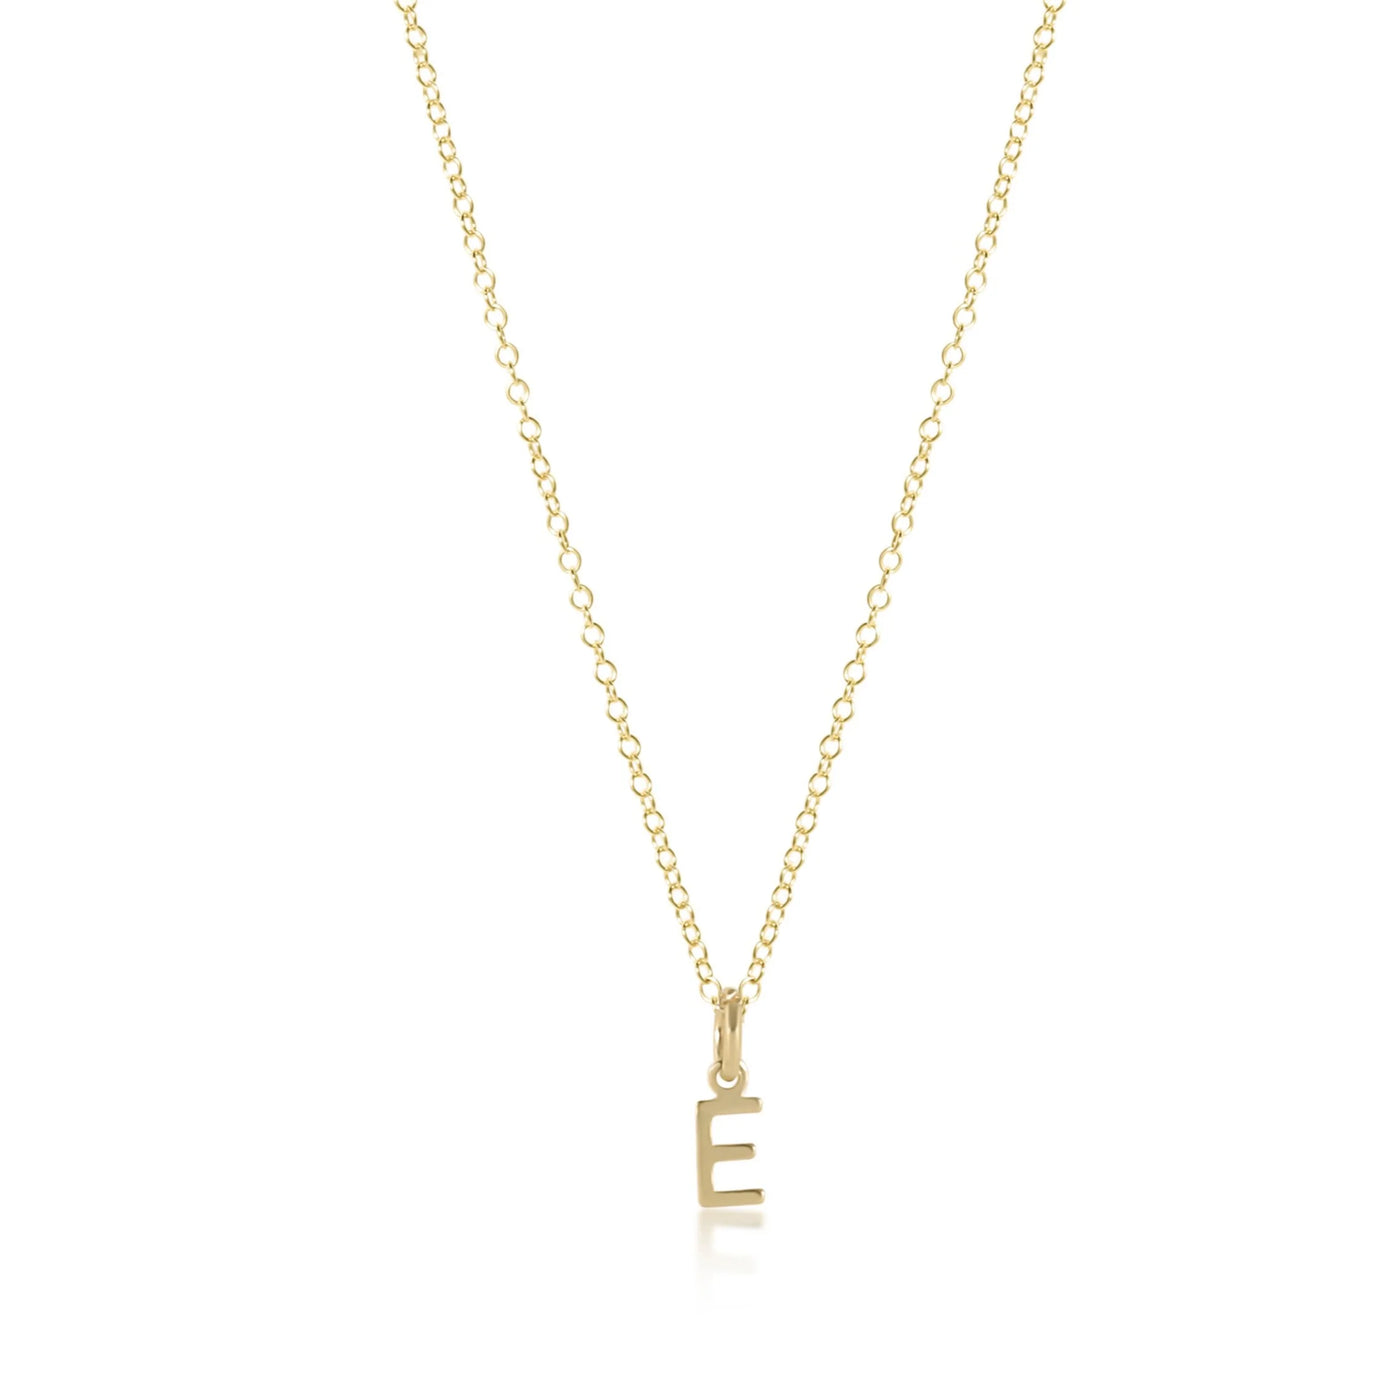 Respect Gold Initial Charm Necklace 16"